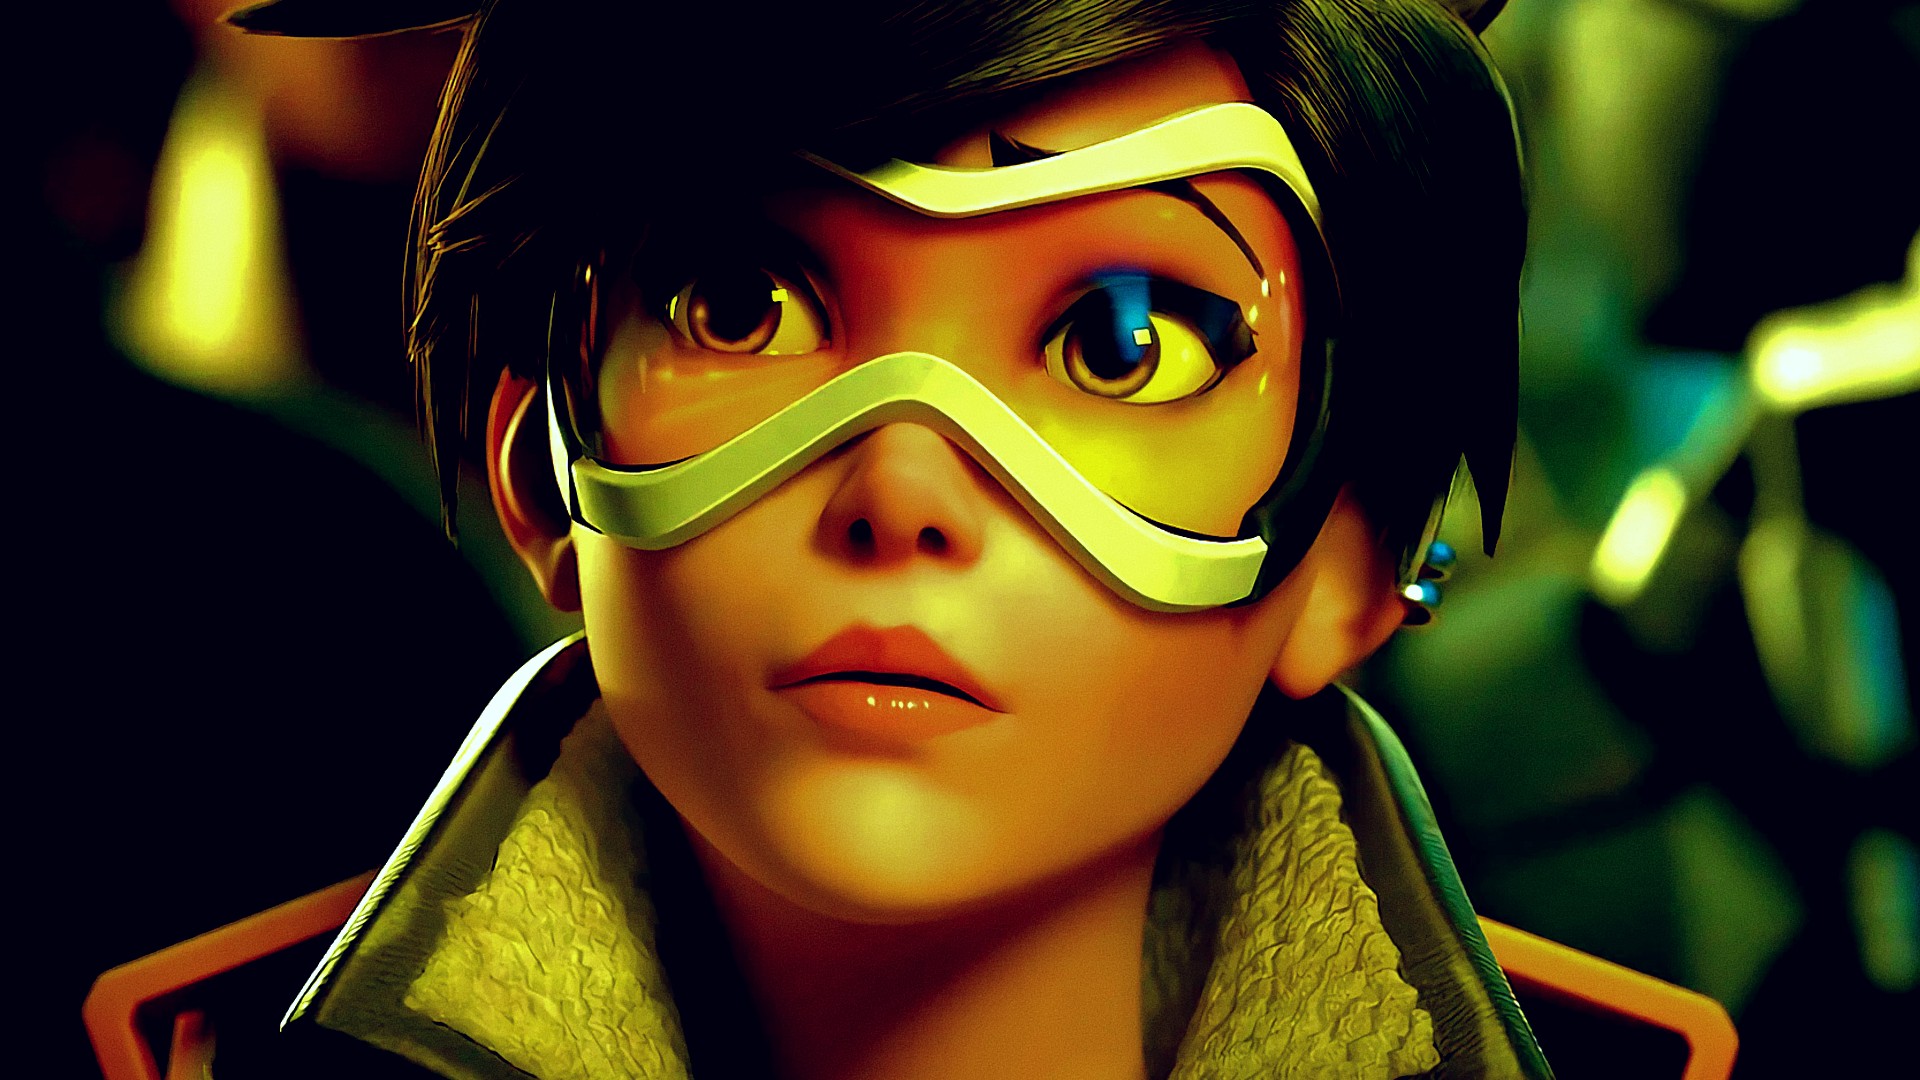 An Overwatch 2 Tracer Skin Is Being Given Away by McDonalds - IGN